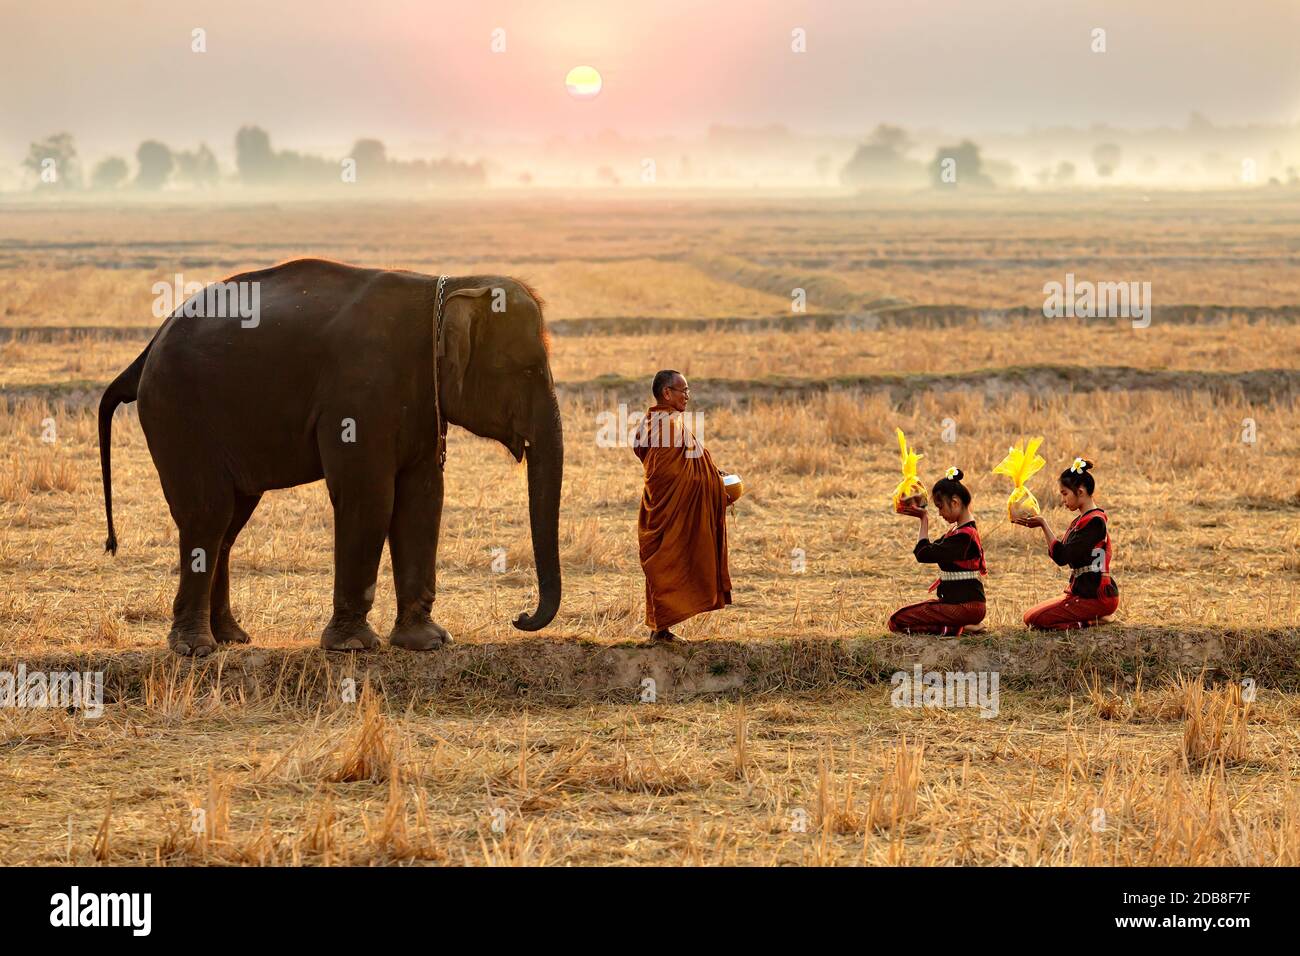 Two women kneeling before a monk and elephant offering alms, Thailand Stock Photo